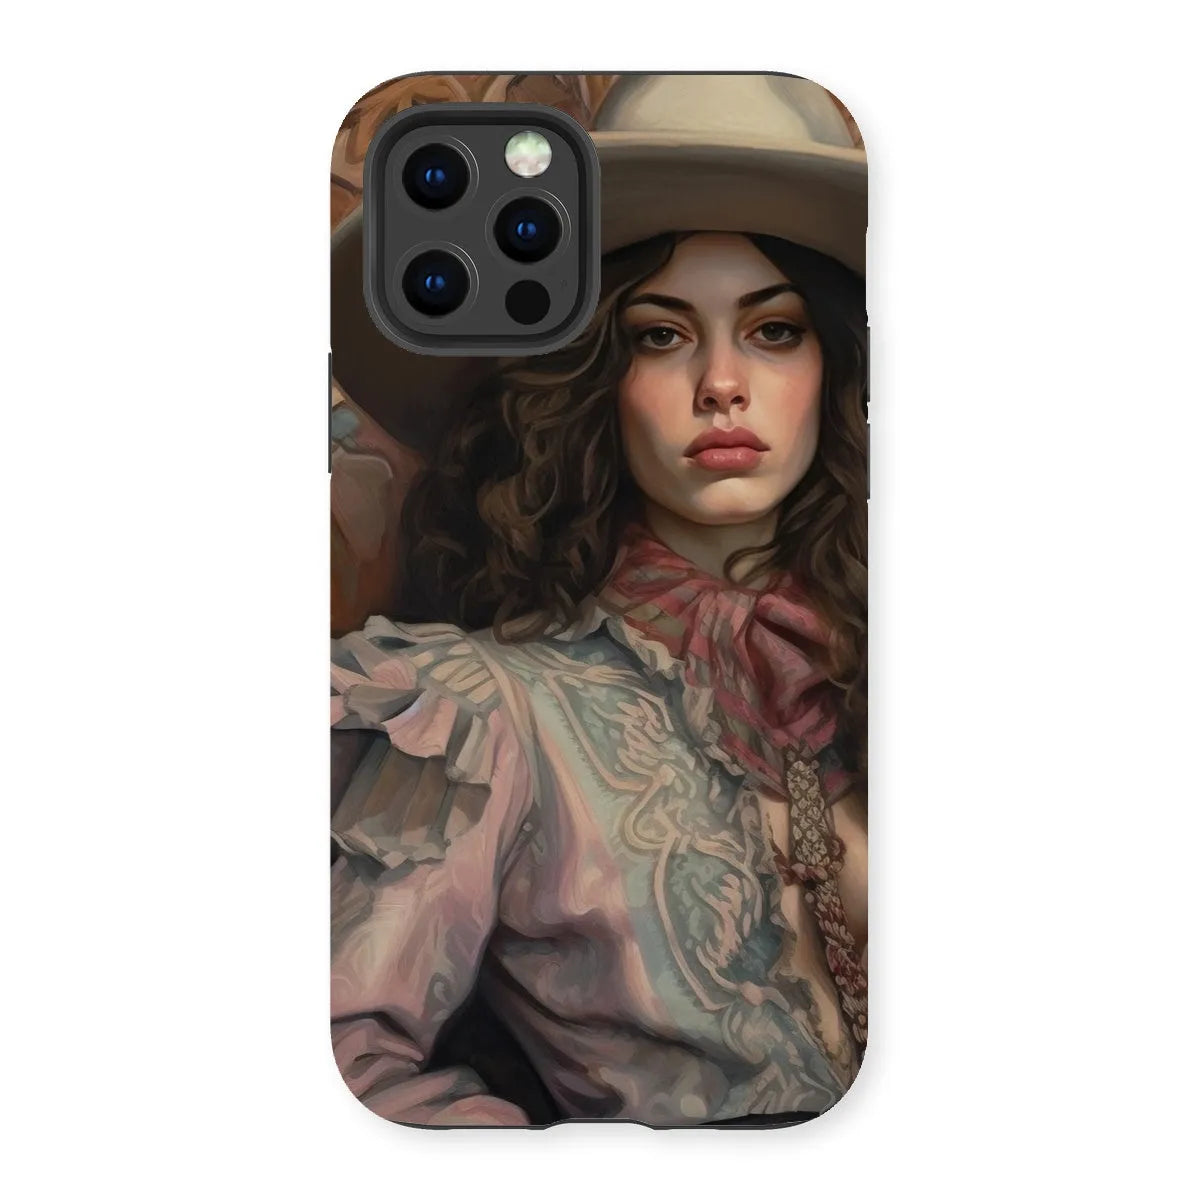 Alex The Lesbian Cowgirl - Sapphic Art Phone Case - Iphone 13 Pro / Matte - Mobile Phone Cases - Aesthetic Art